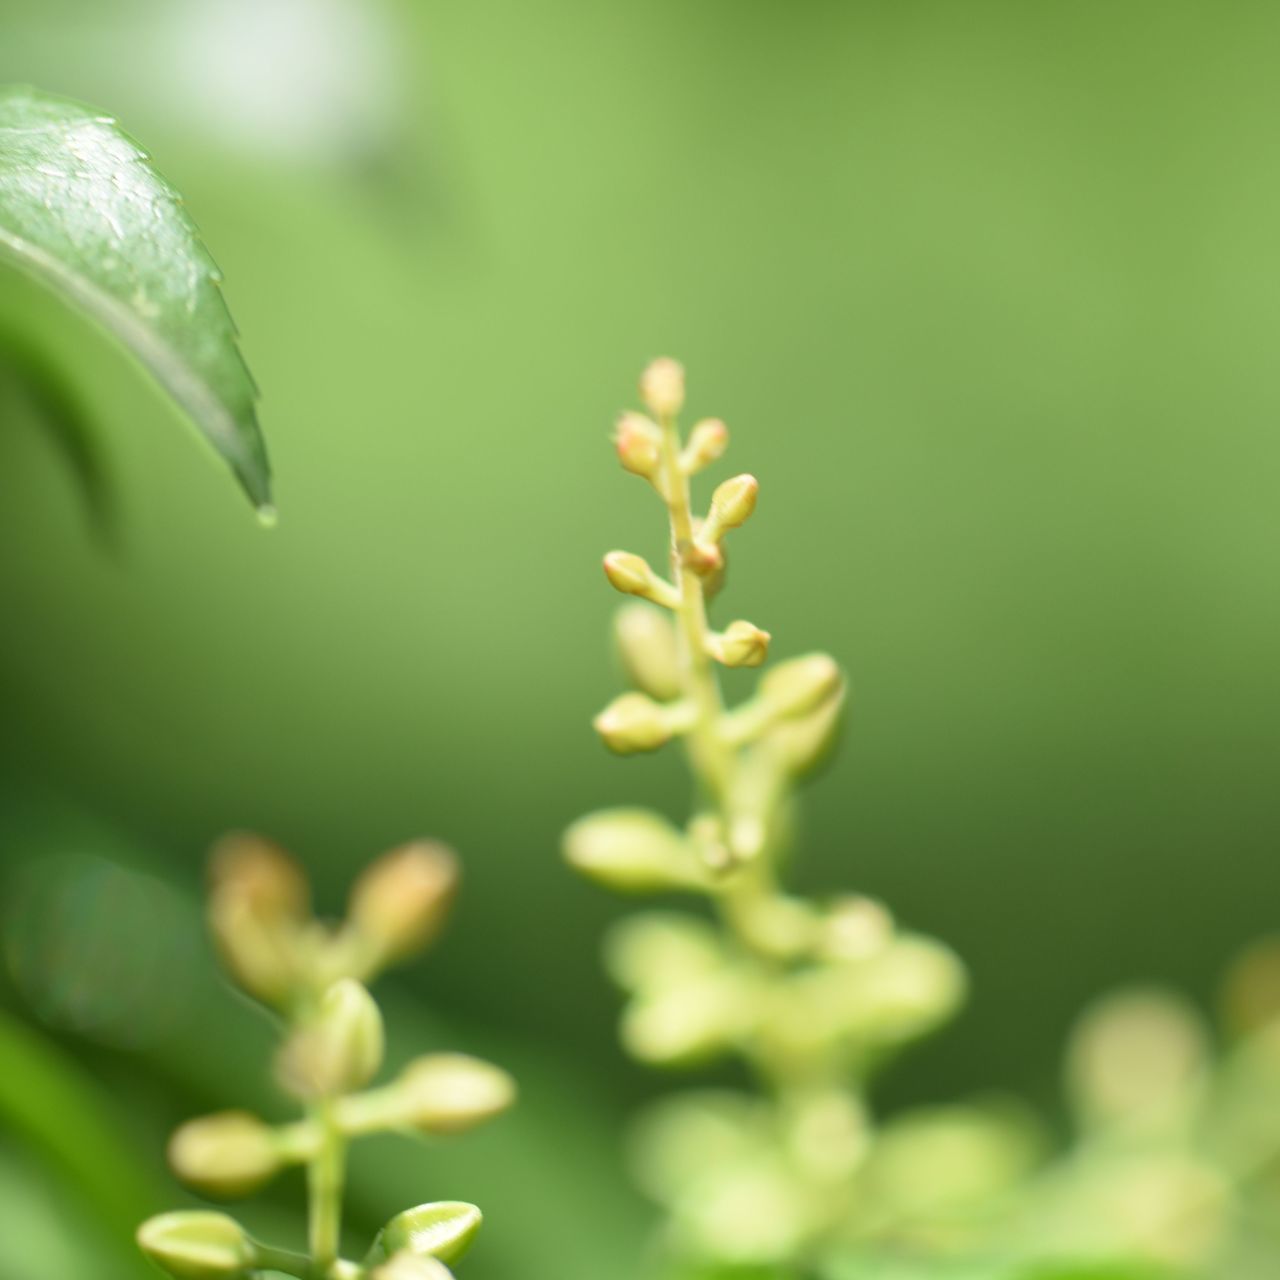 growth, plant, selective focus, green color, close-up, no people, beauty in nature, nature, vulnerability, fragility, plant part, freshness, leaf, day, focus on foreground, flower, beginnings, outdoors, flowering plant, bud